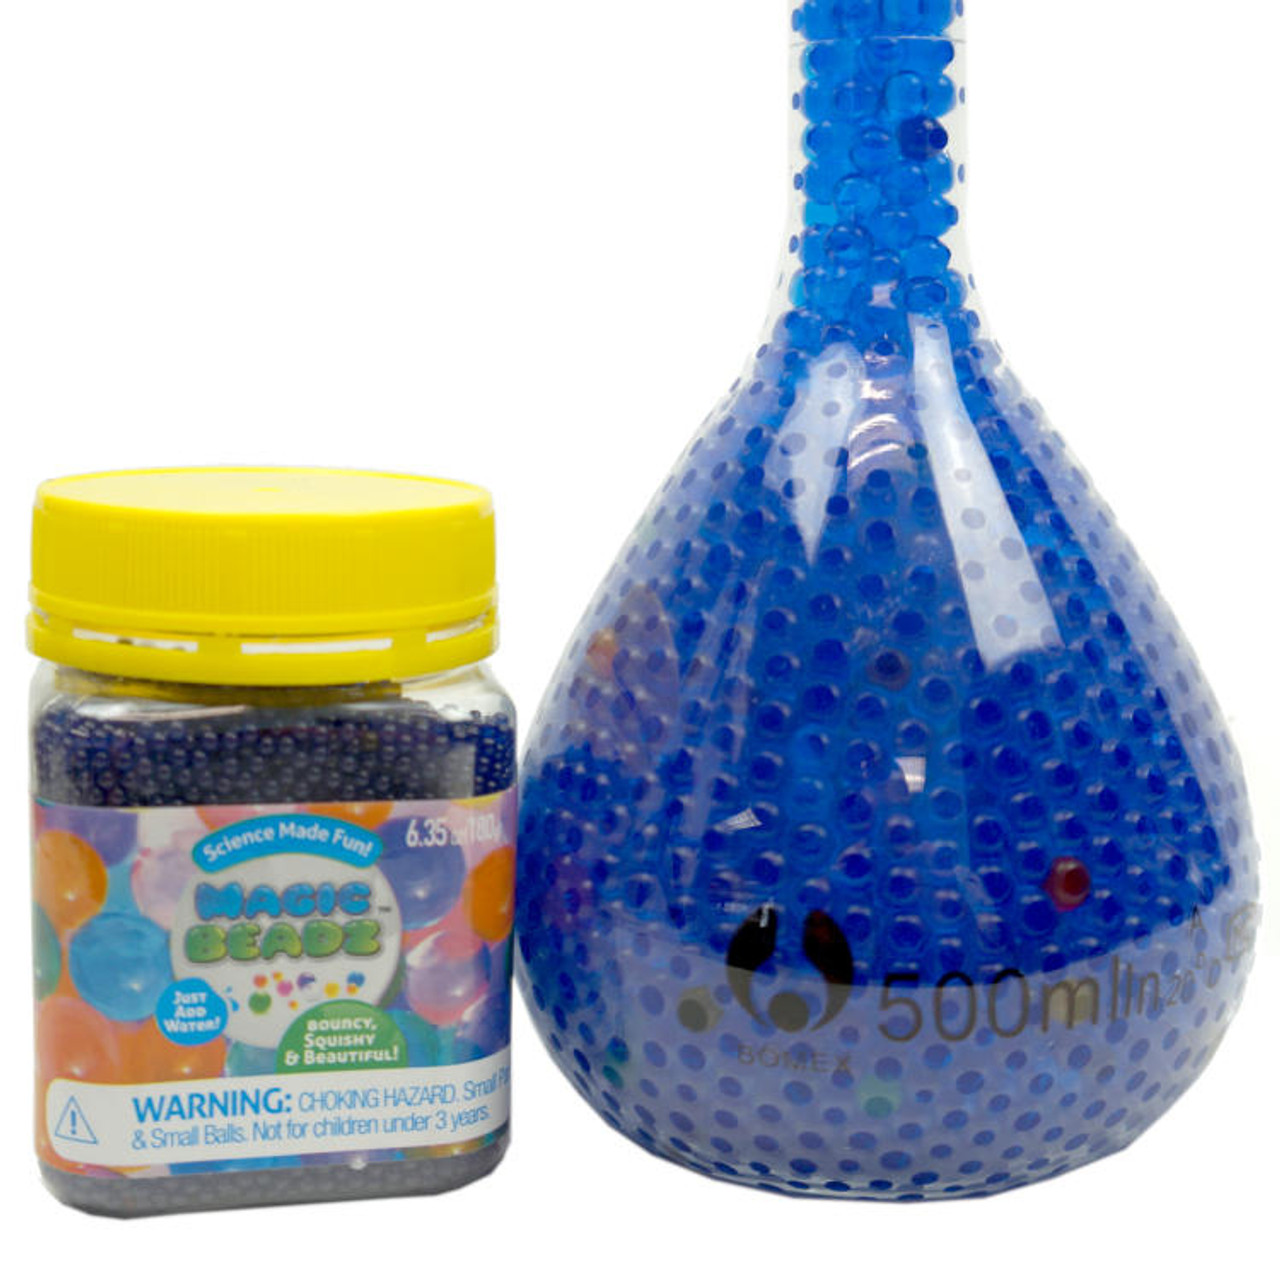 COLORFUL NON TOXIC WATER BEADS 6.35 OUNCE JAR